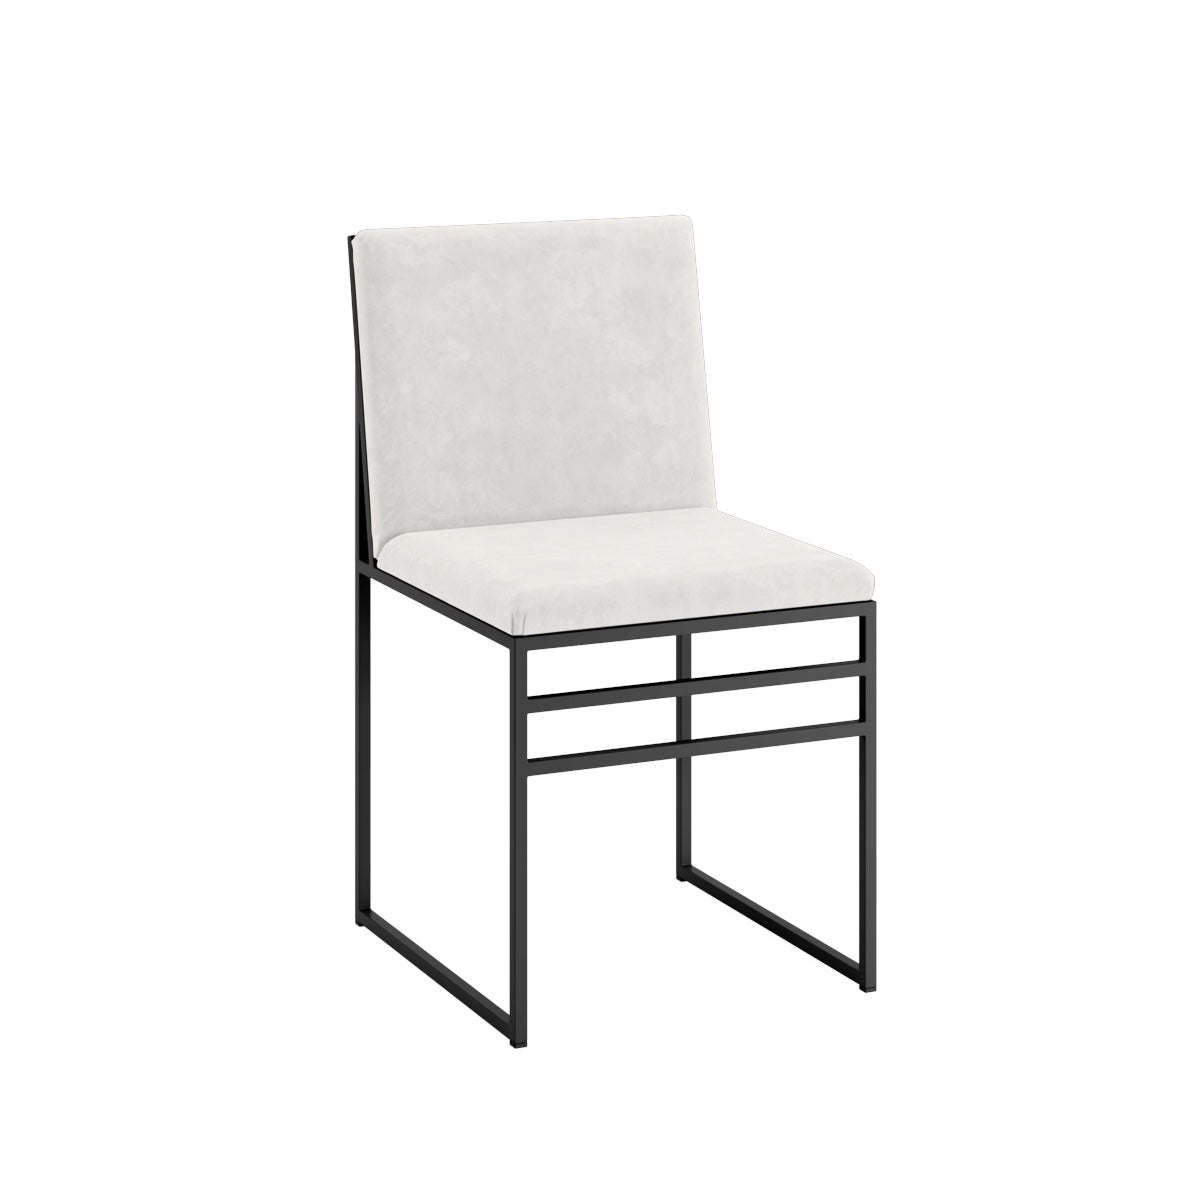 HAND CRAFTED MAYFAIR METAL FRAME WHITE SUEDE DINING CHAIR